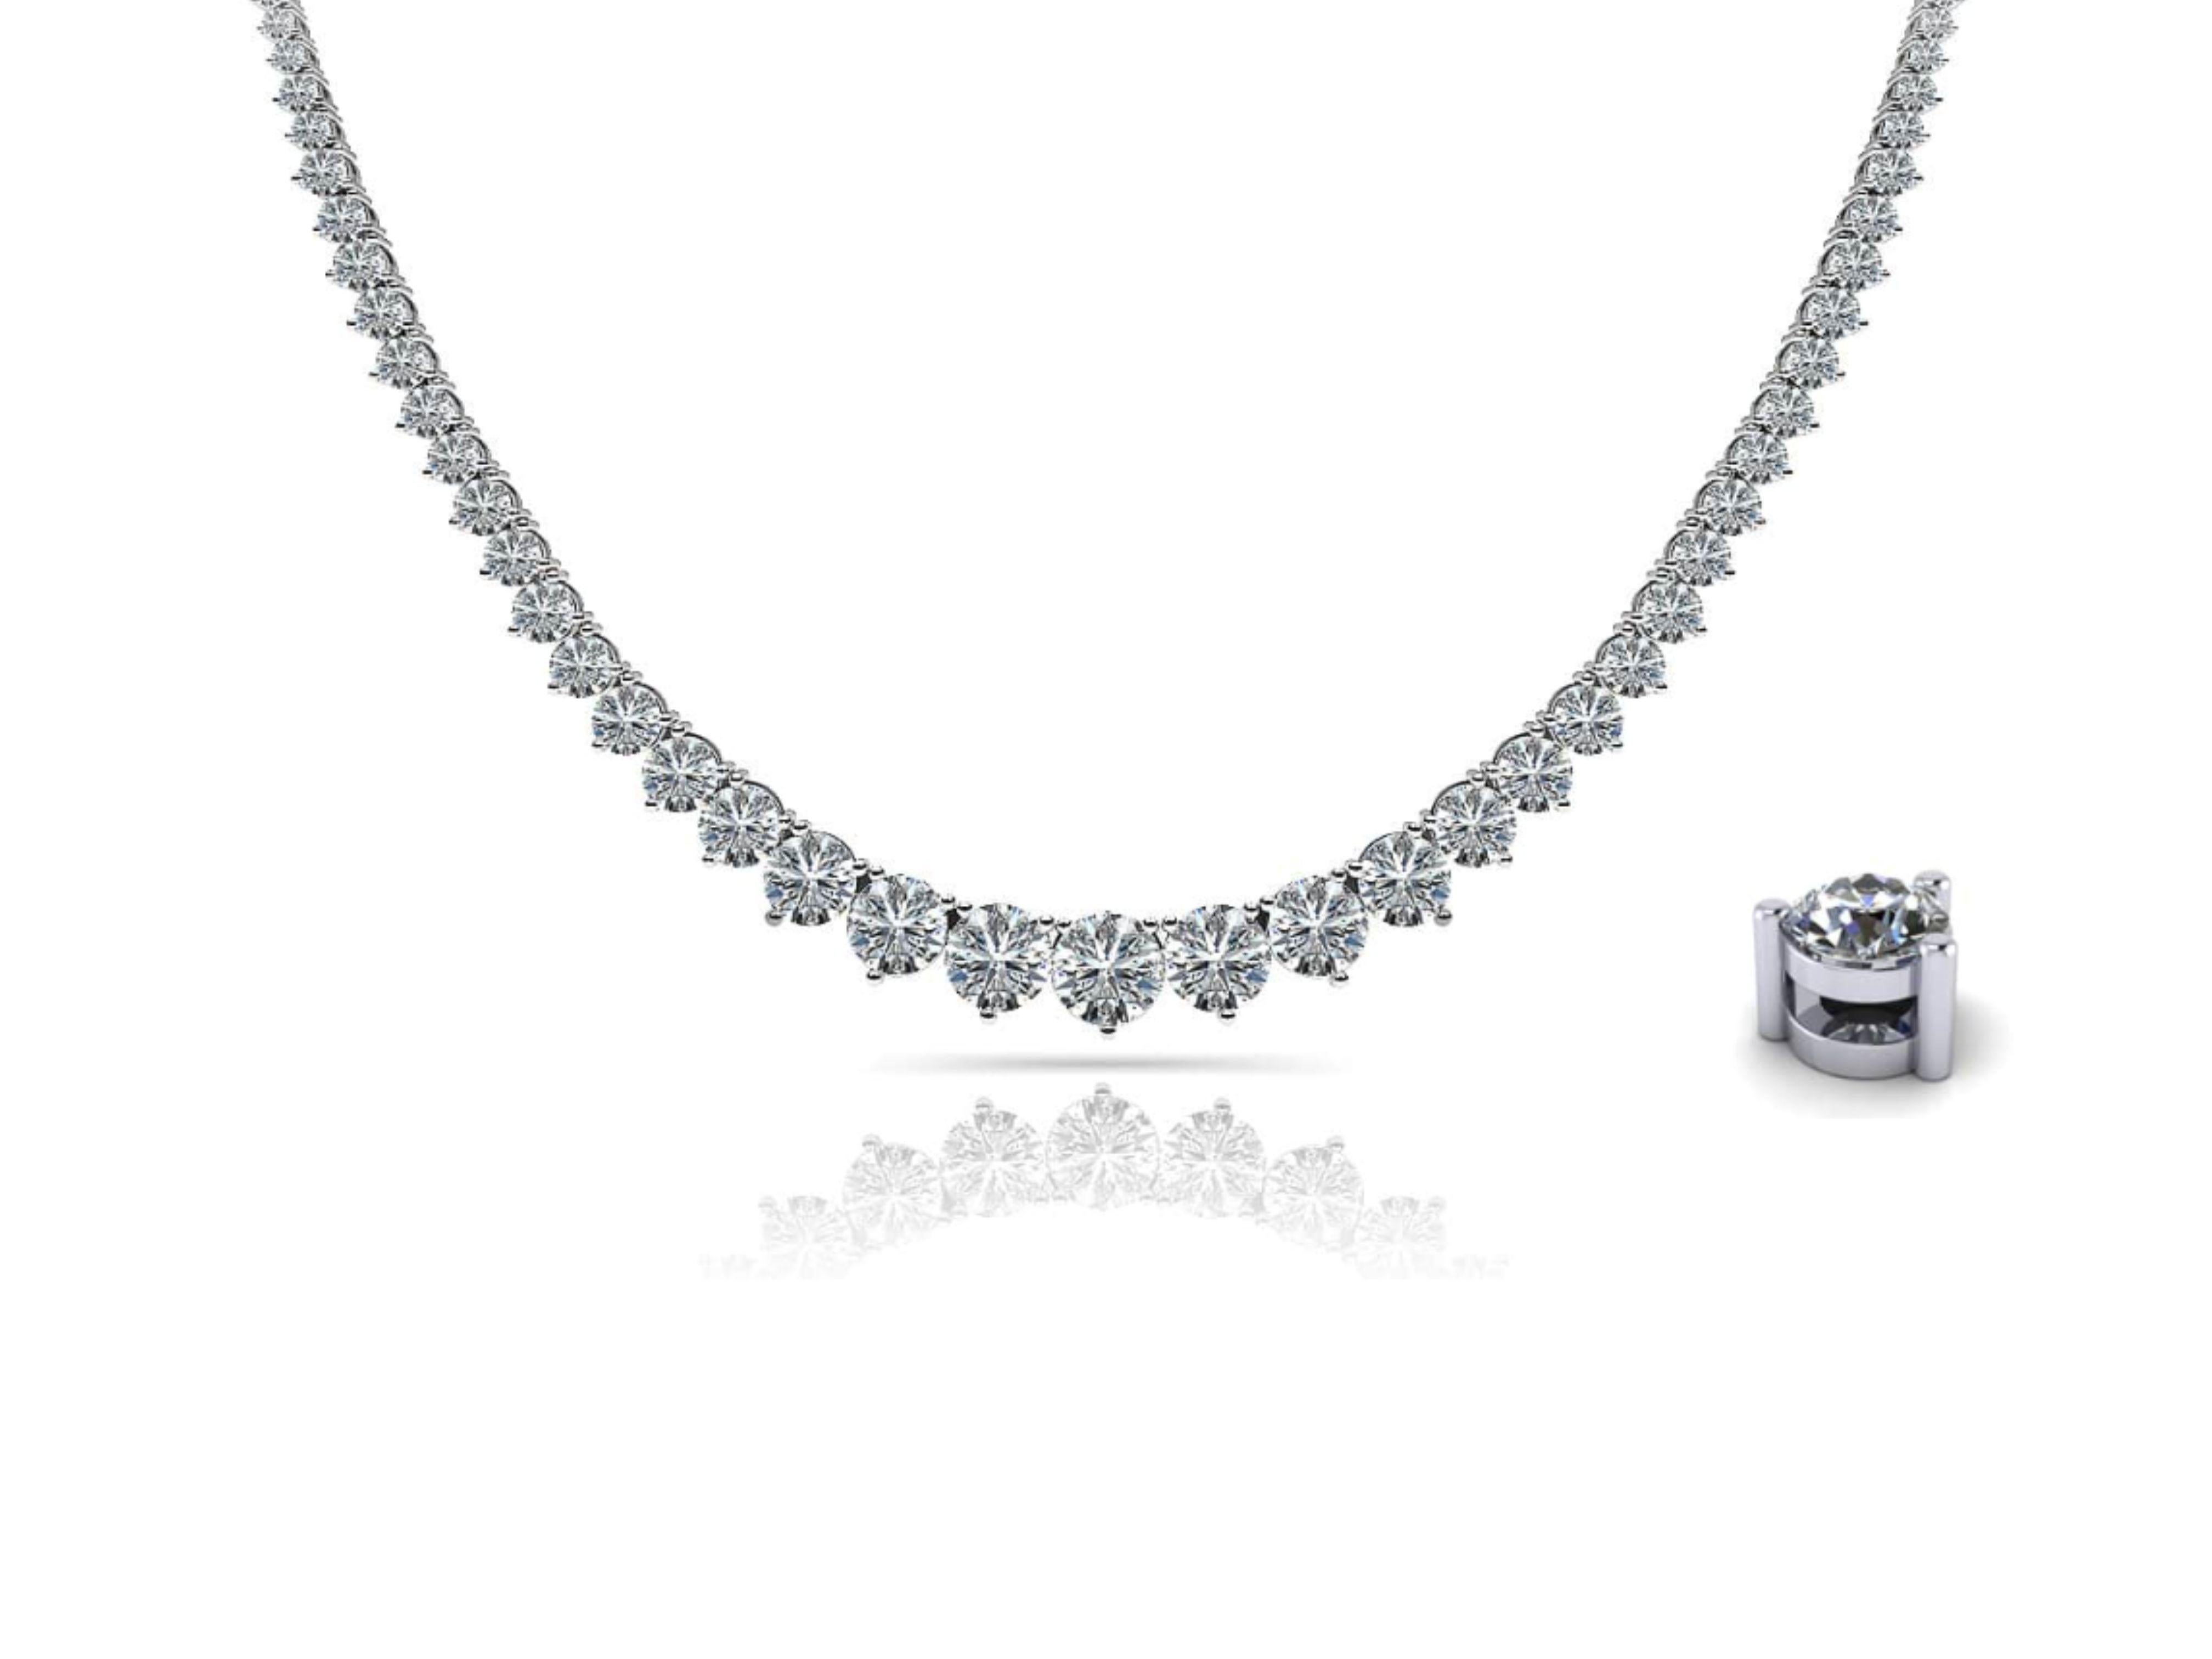 15.50 Carat Total Natural Graduated Diamond Riviera Necklace in Platinum. 

This unisex necklace features 134 individual natural round brilliant cut white diamonds. Together, the diamonds carry a weight of 15.50 carats. The larger diamonds measure